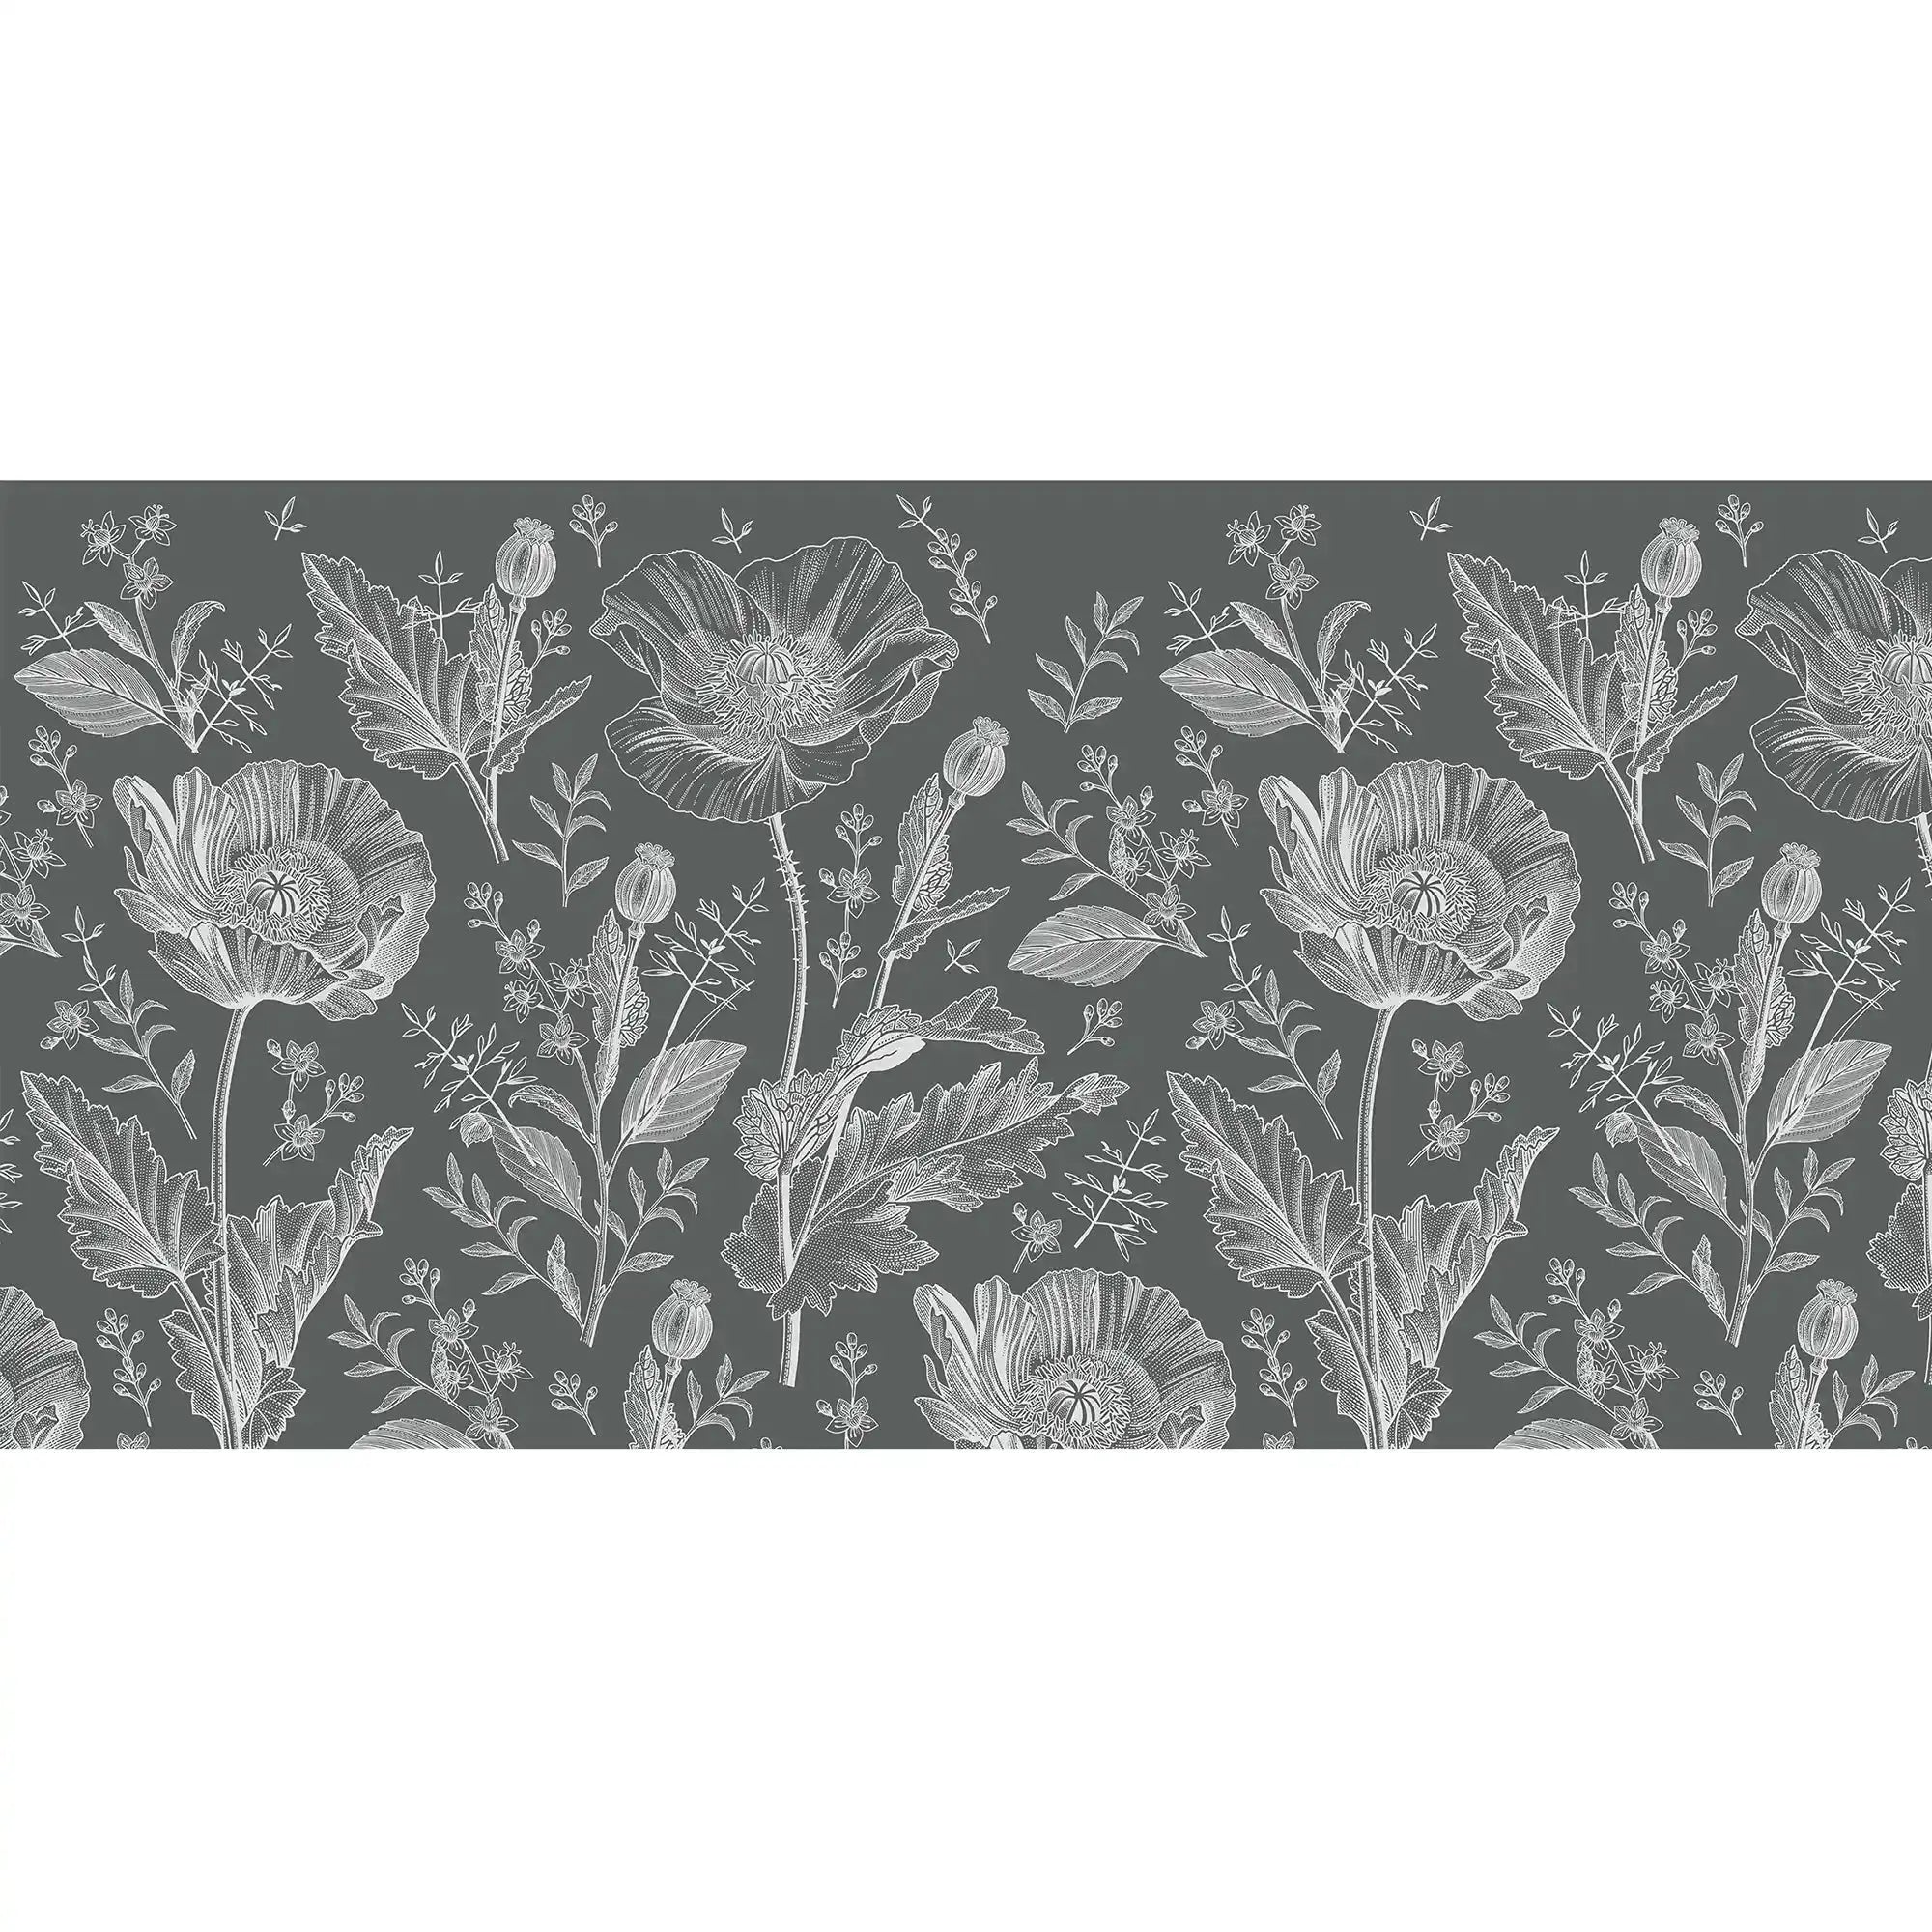 3093-F / Floral Wall Mural: Self Adhesive, Removable Wallpaper for Modern and Boho Decor - Artevella